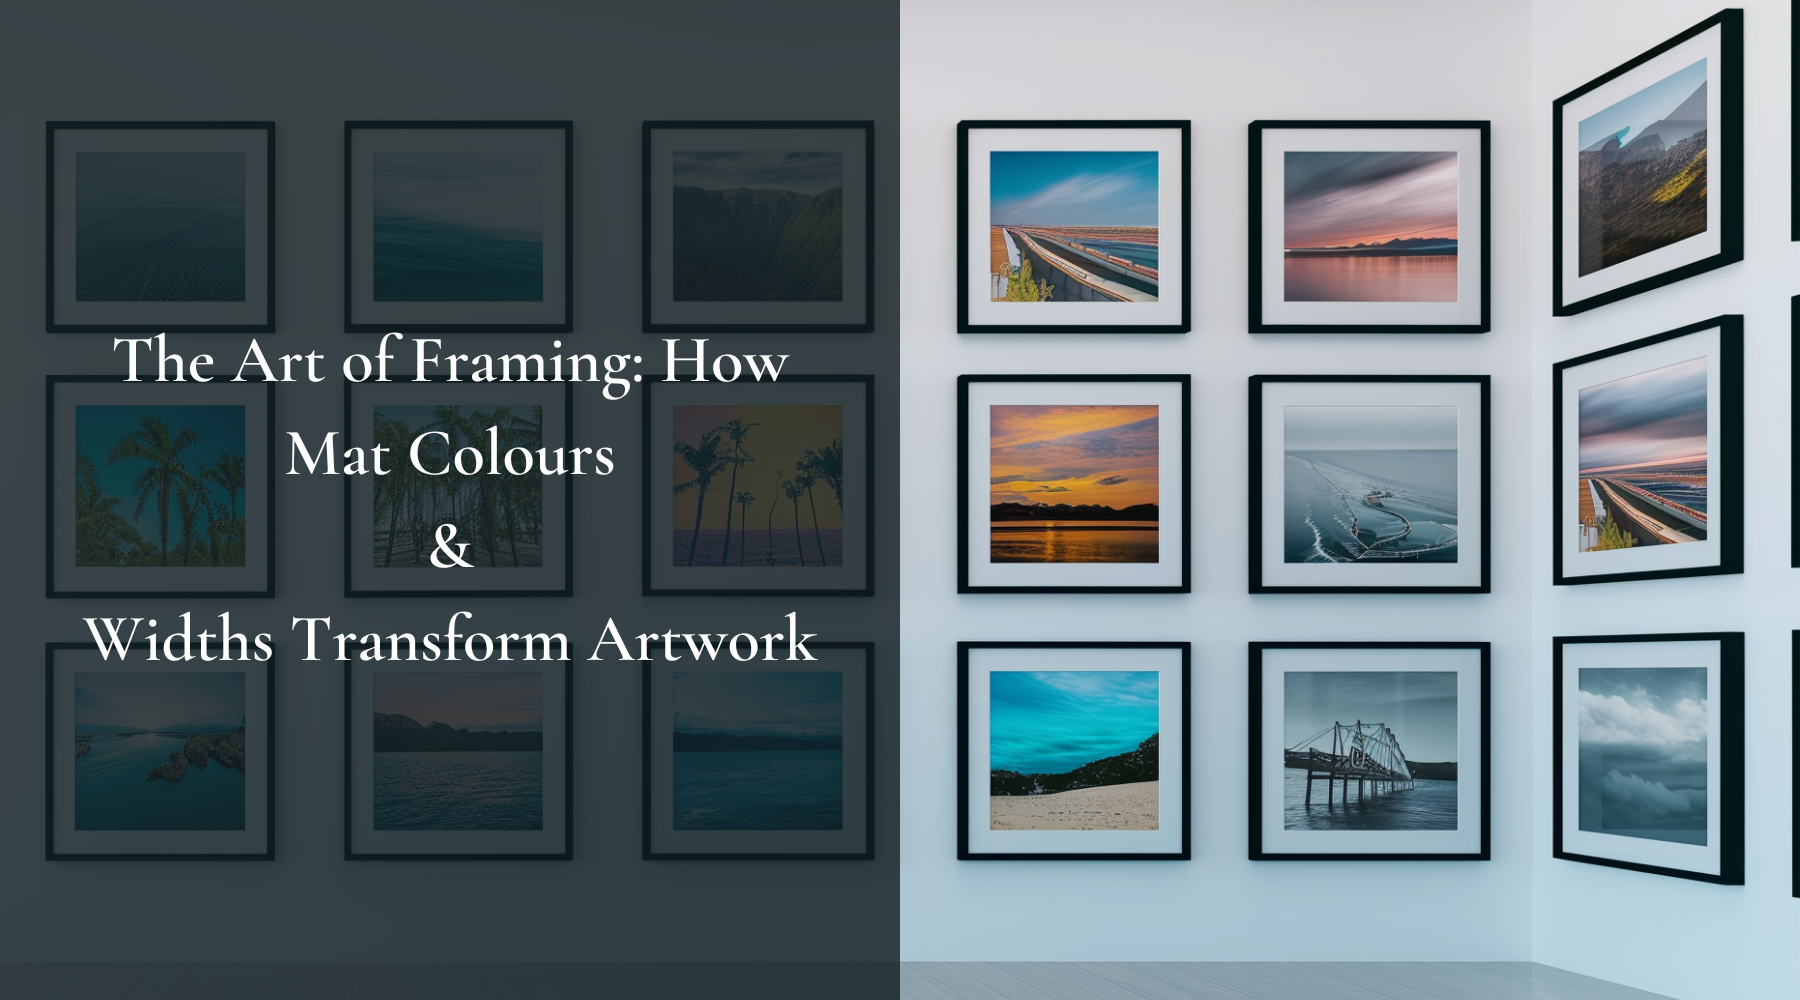 The Art of Framing: How Mat Colours and Widths Transform Artwork